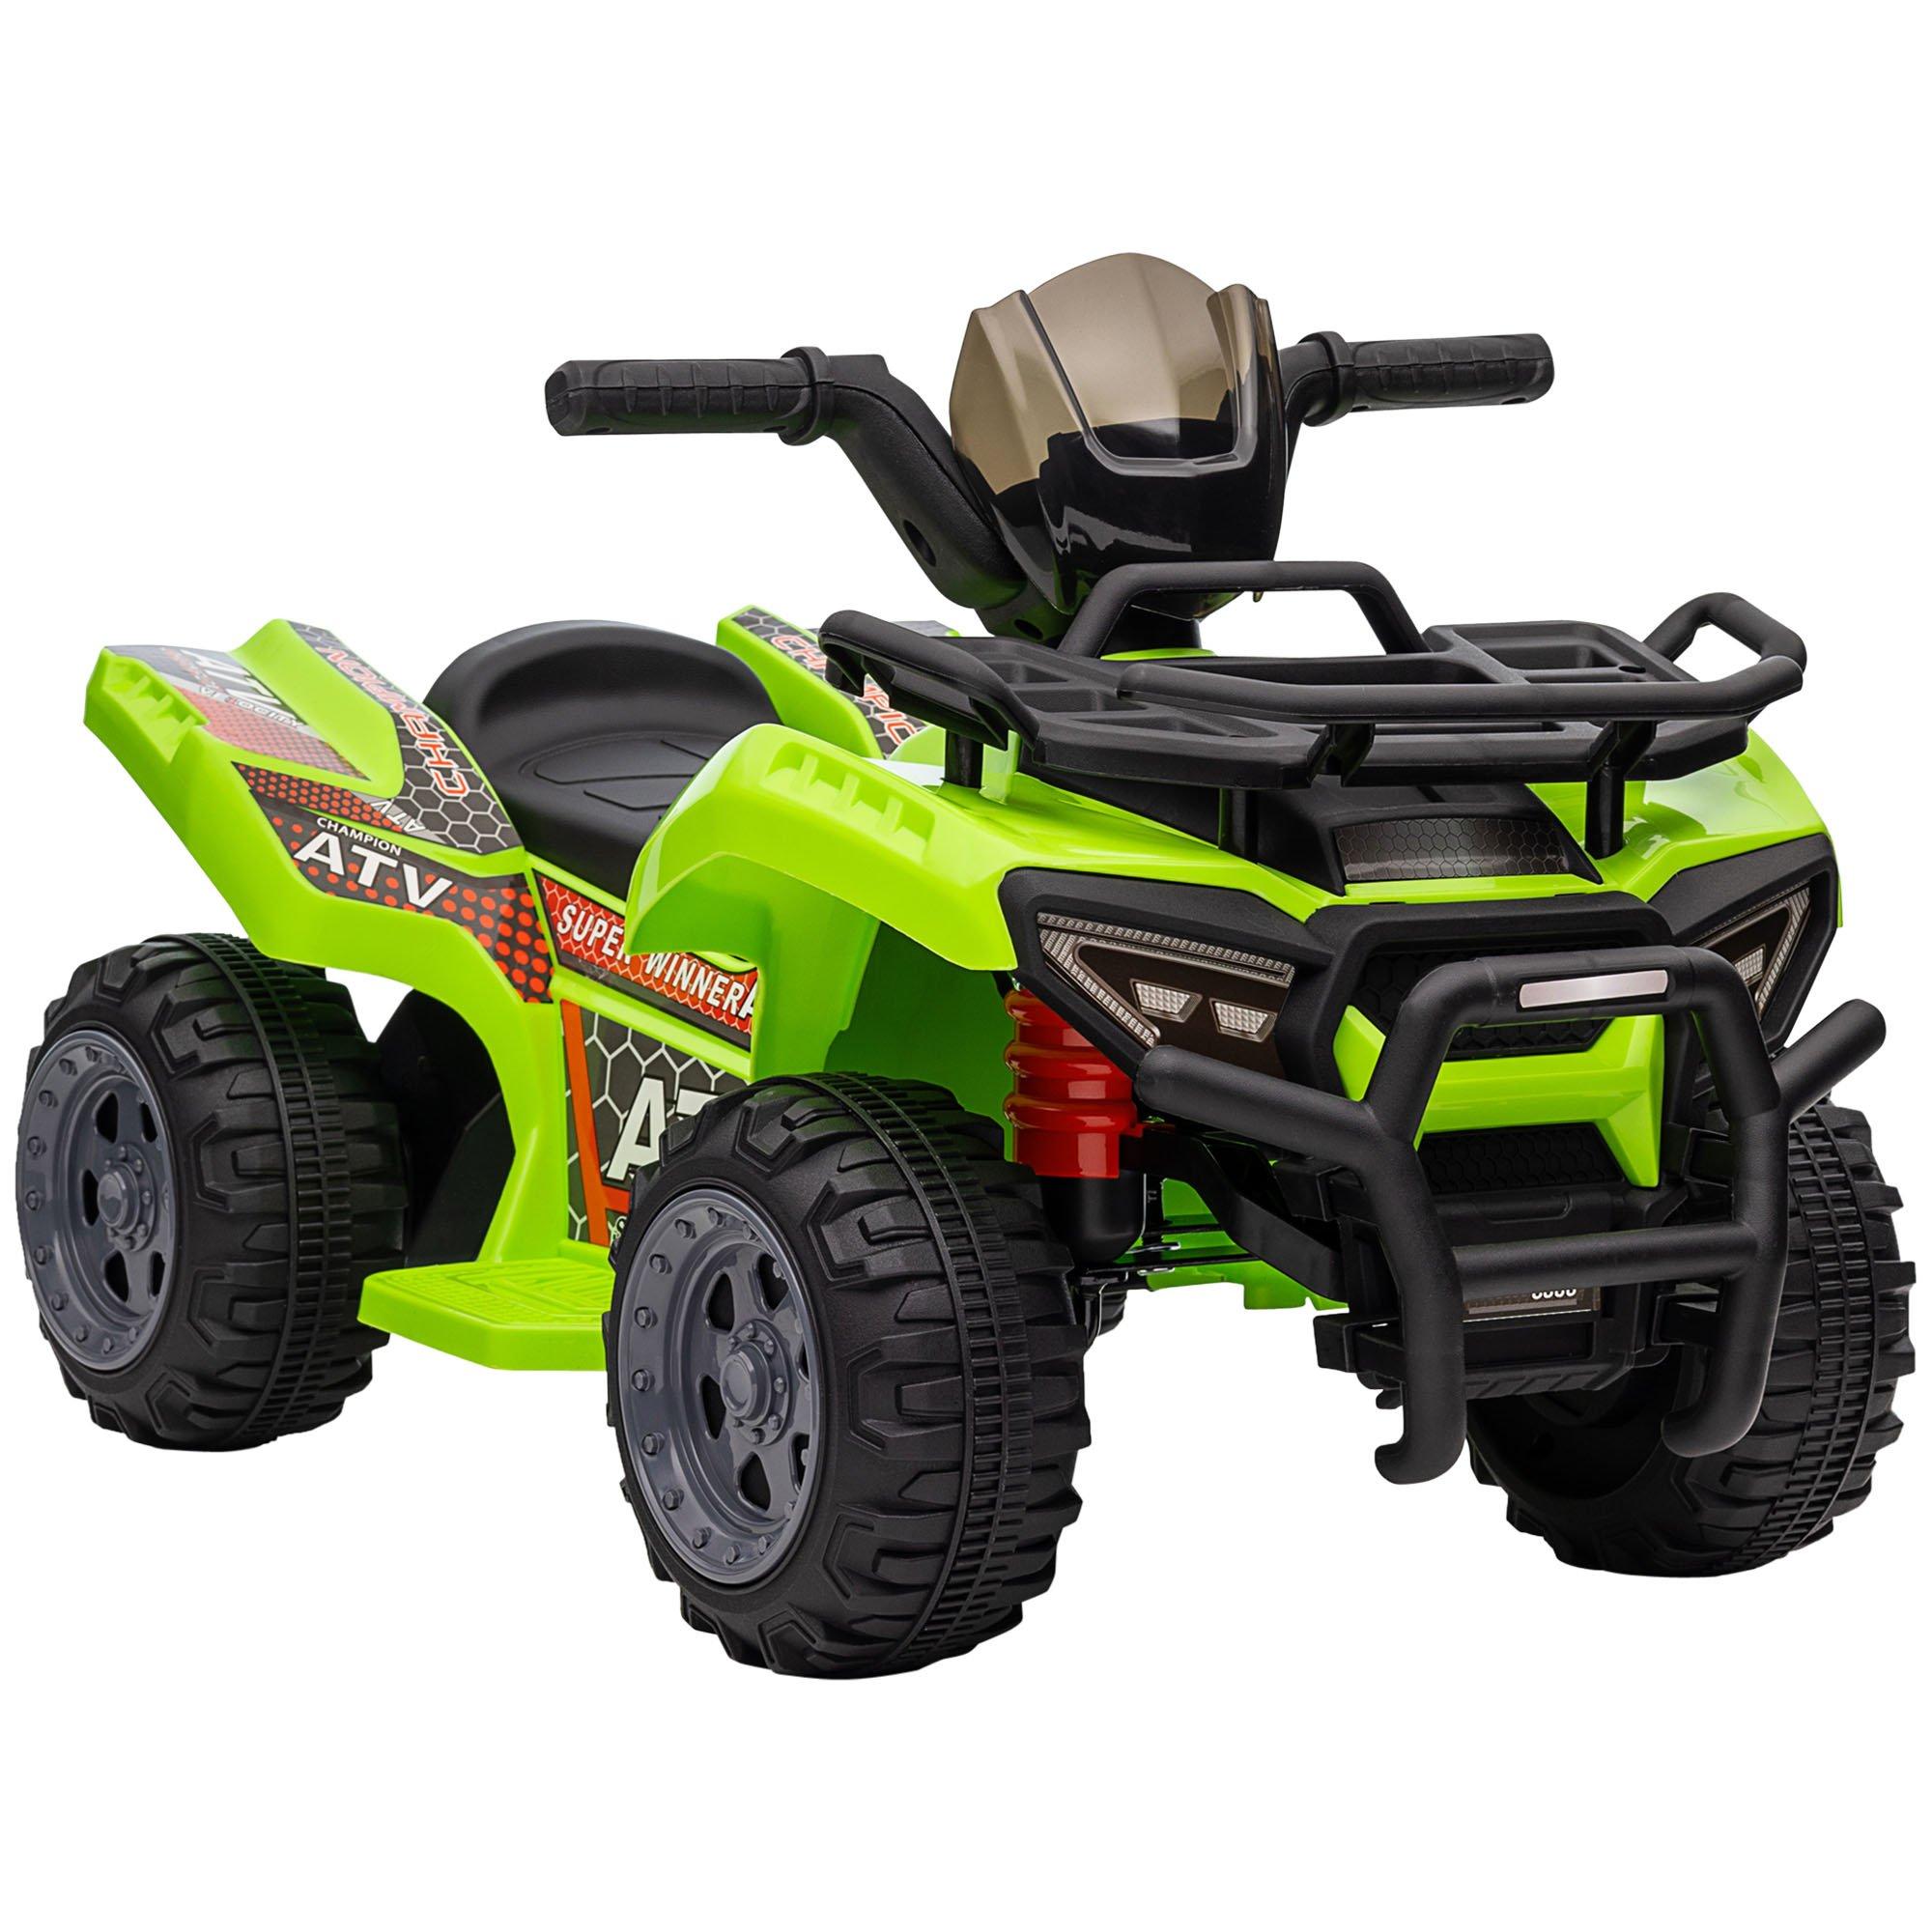 Kids Ride-on Four Wheeler ATV Car with Music for 18-36 months